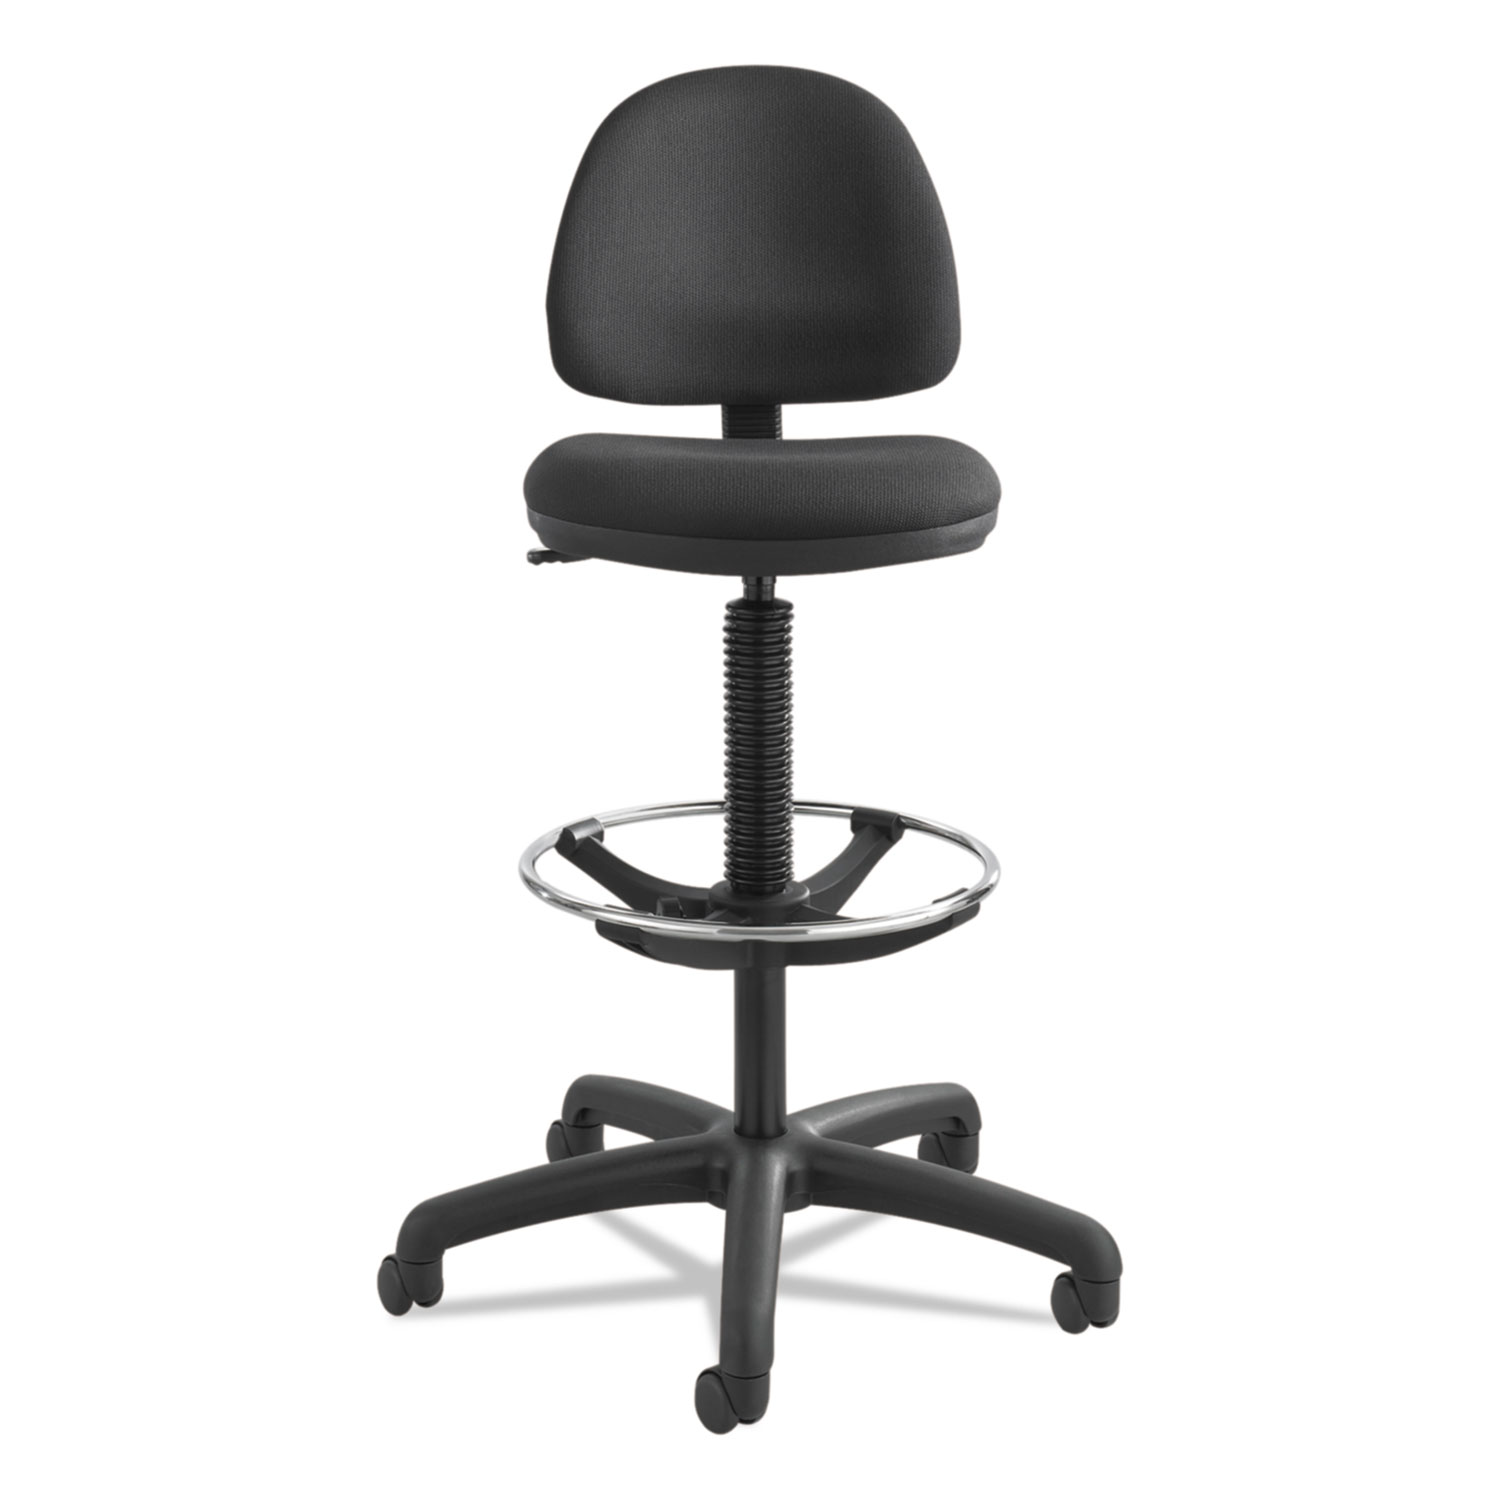 Precision Extended Height Swivel Stool w/Adjustable Footring, Black Fabric